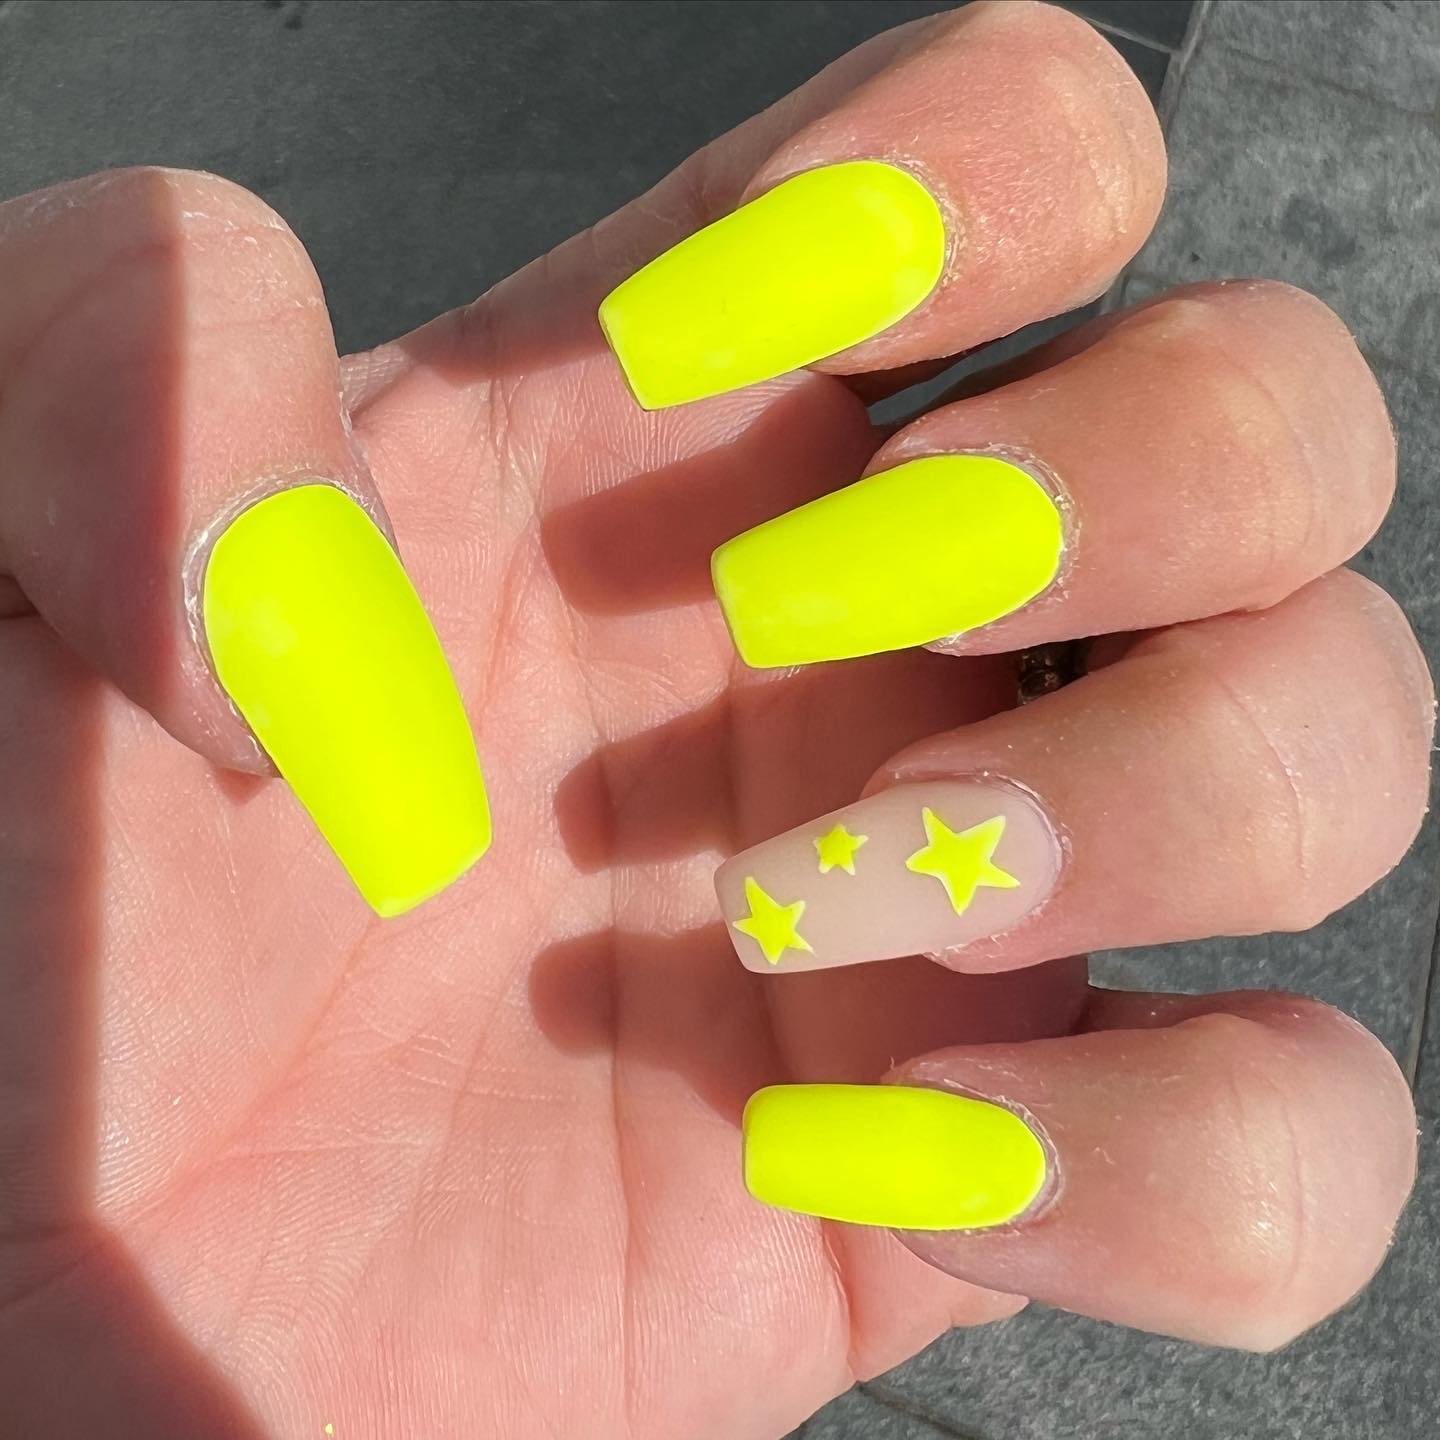 This light yellow matte nails with a star nail art design are all you need to shine out. Whenever you look at your nails, they will make you happy.